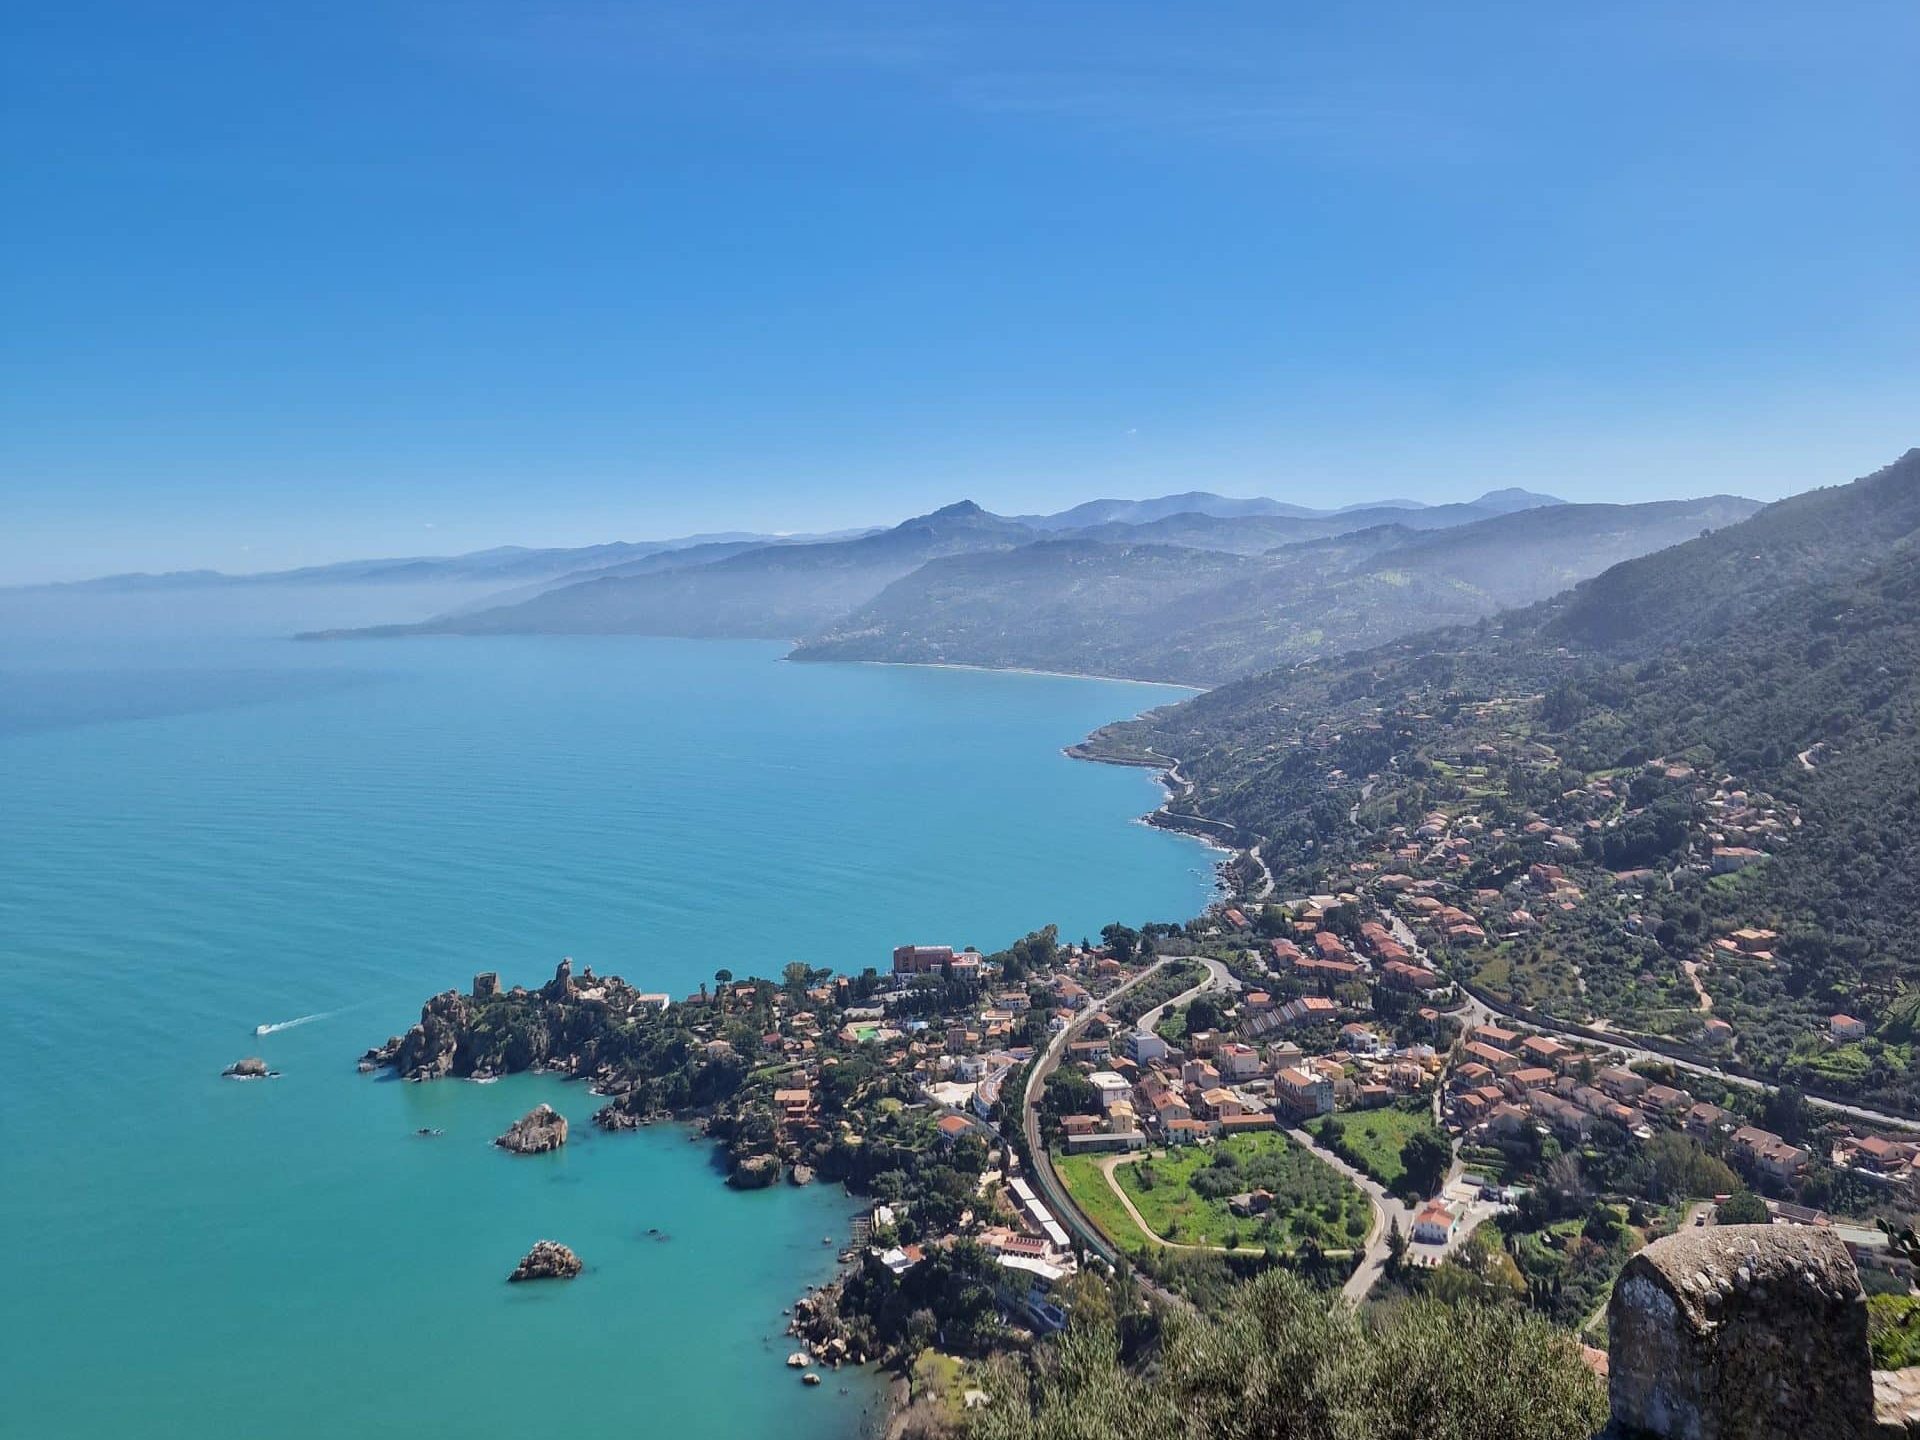 View from the Cefalù Rock